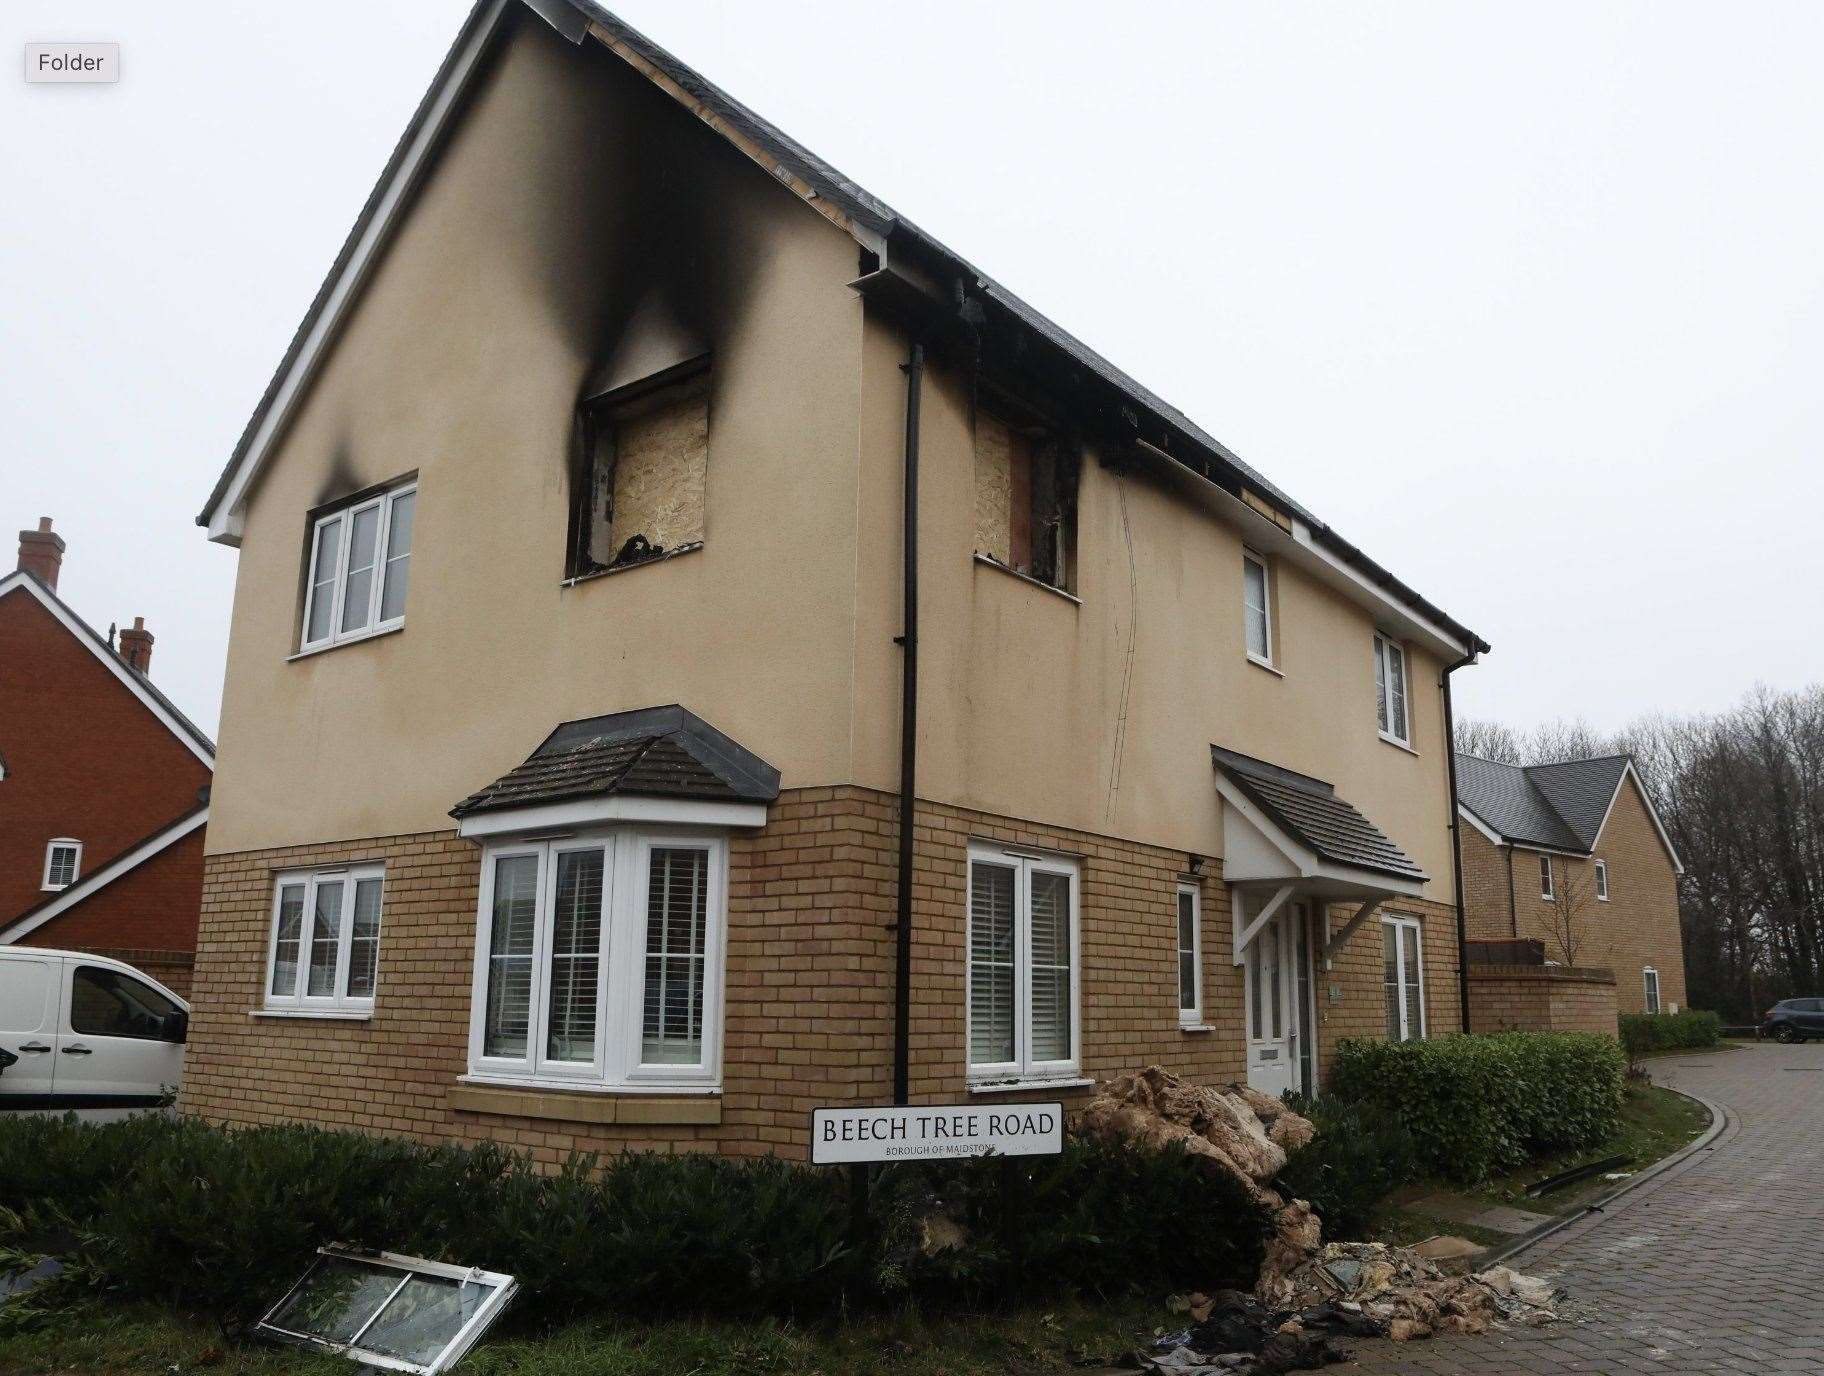 The aftermath of the Christmas Day fire which damaged a family home in Beech Tree Road, Maidstone. Photo: UKNIP